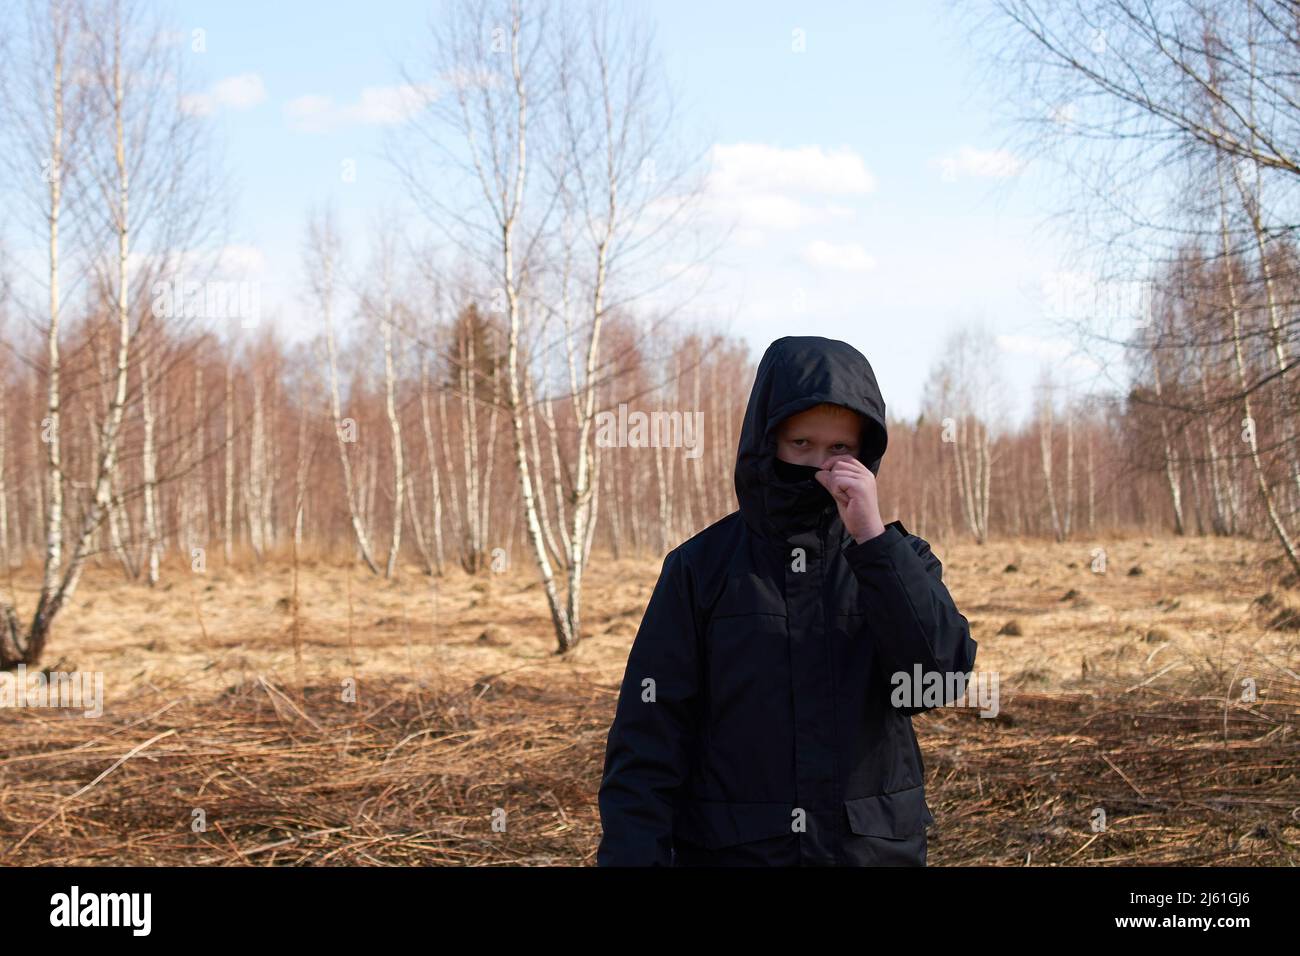 A European preteen in a black hooded jacket and a black mask Stock Photo